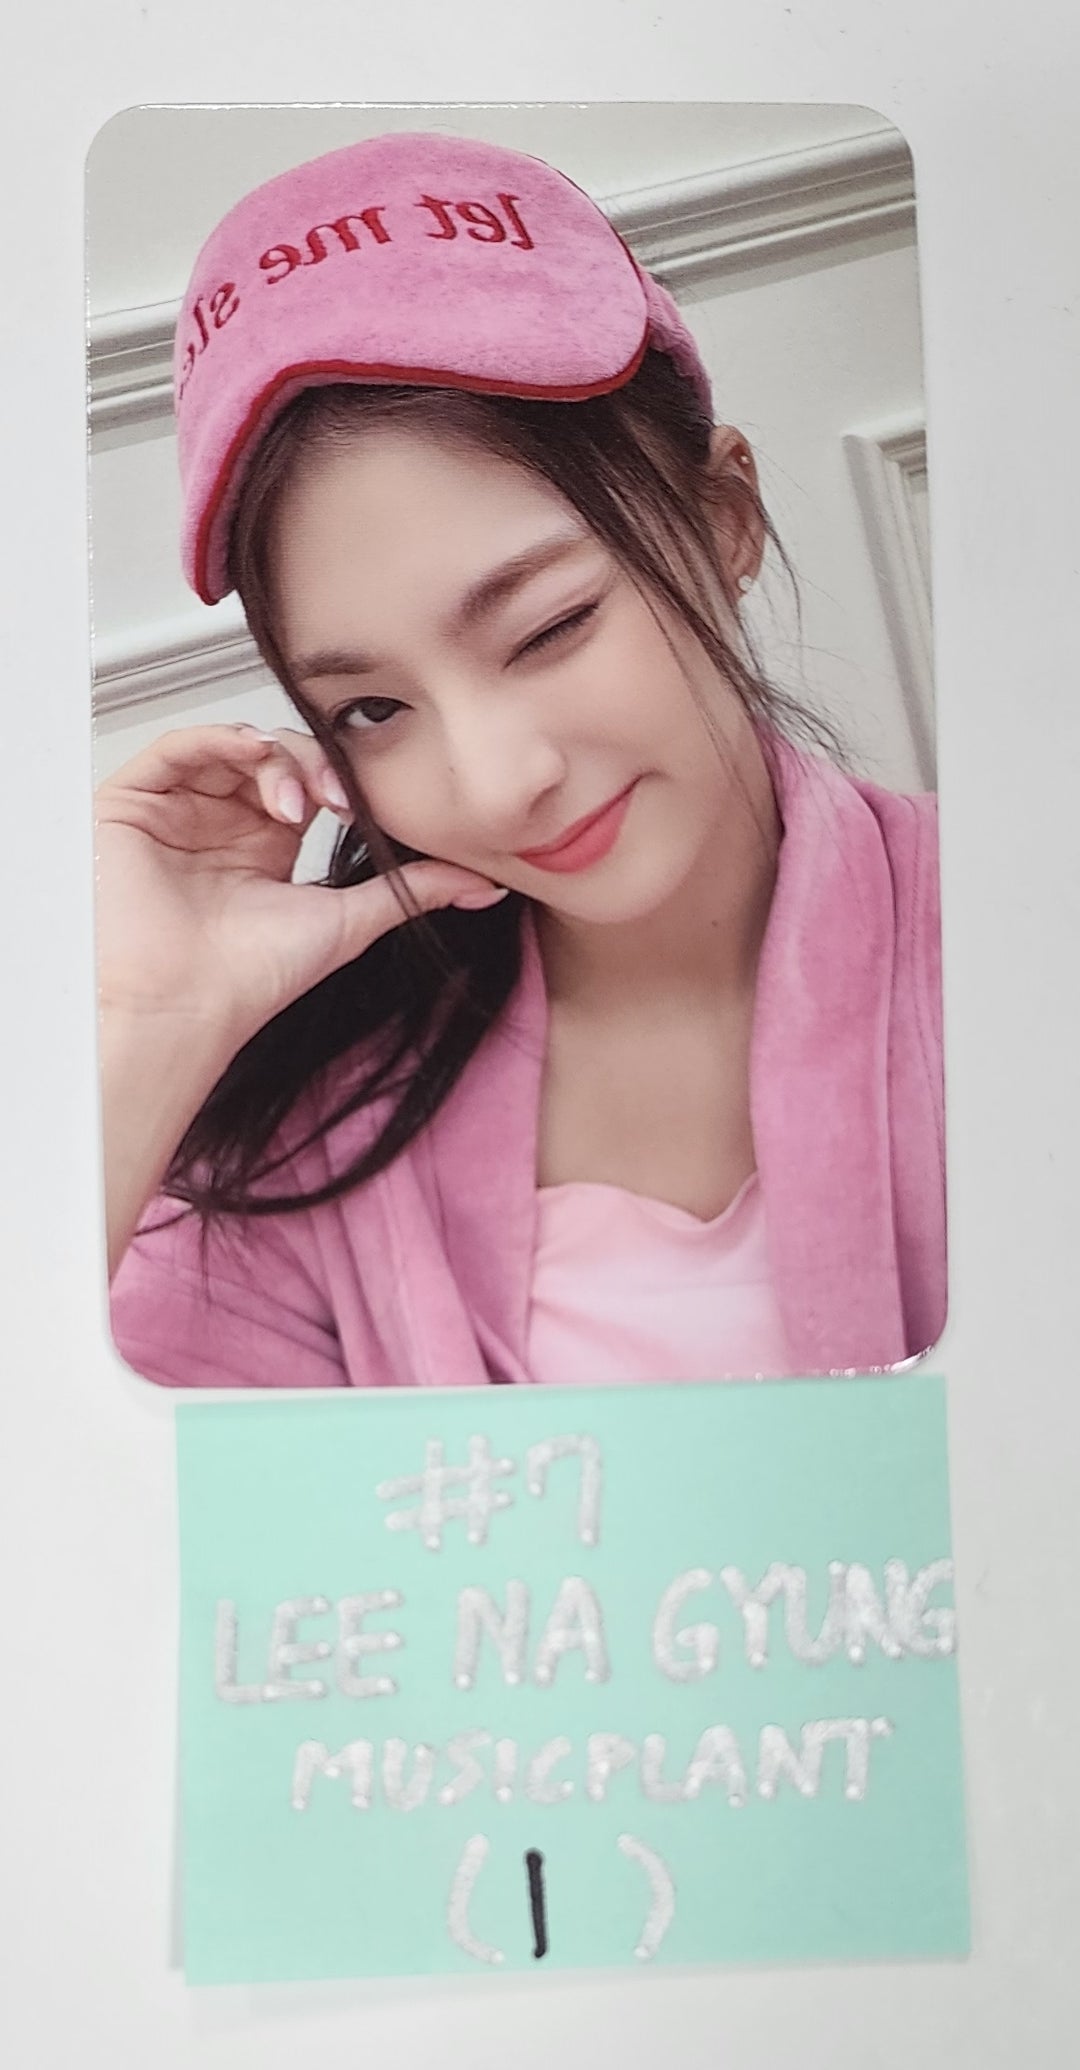 Fromis_9 "Unlock My World" - Music Plant Fansign Event Photocard